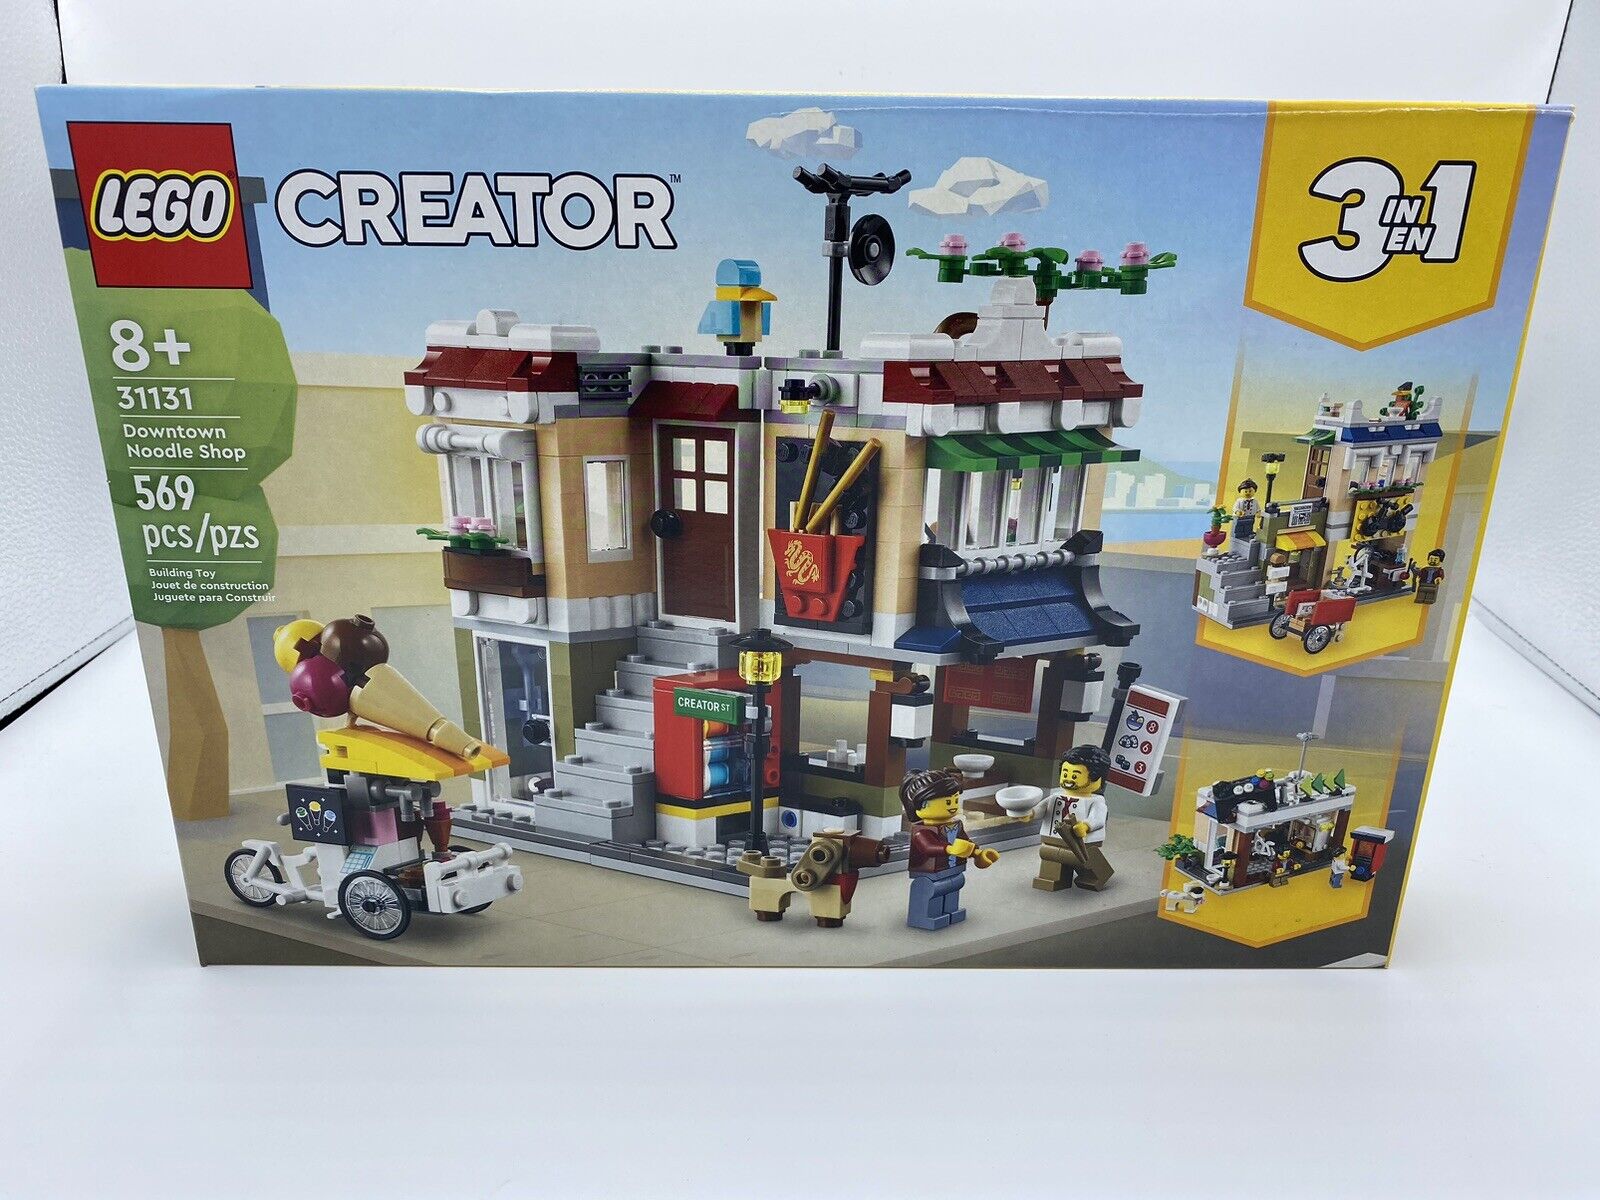 LEGO 31131 Creator 3-in-1 Downtown Noodle Shop